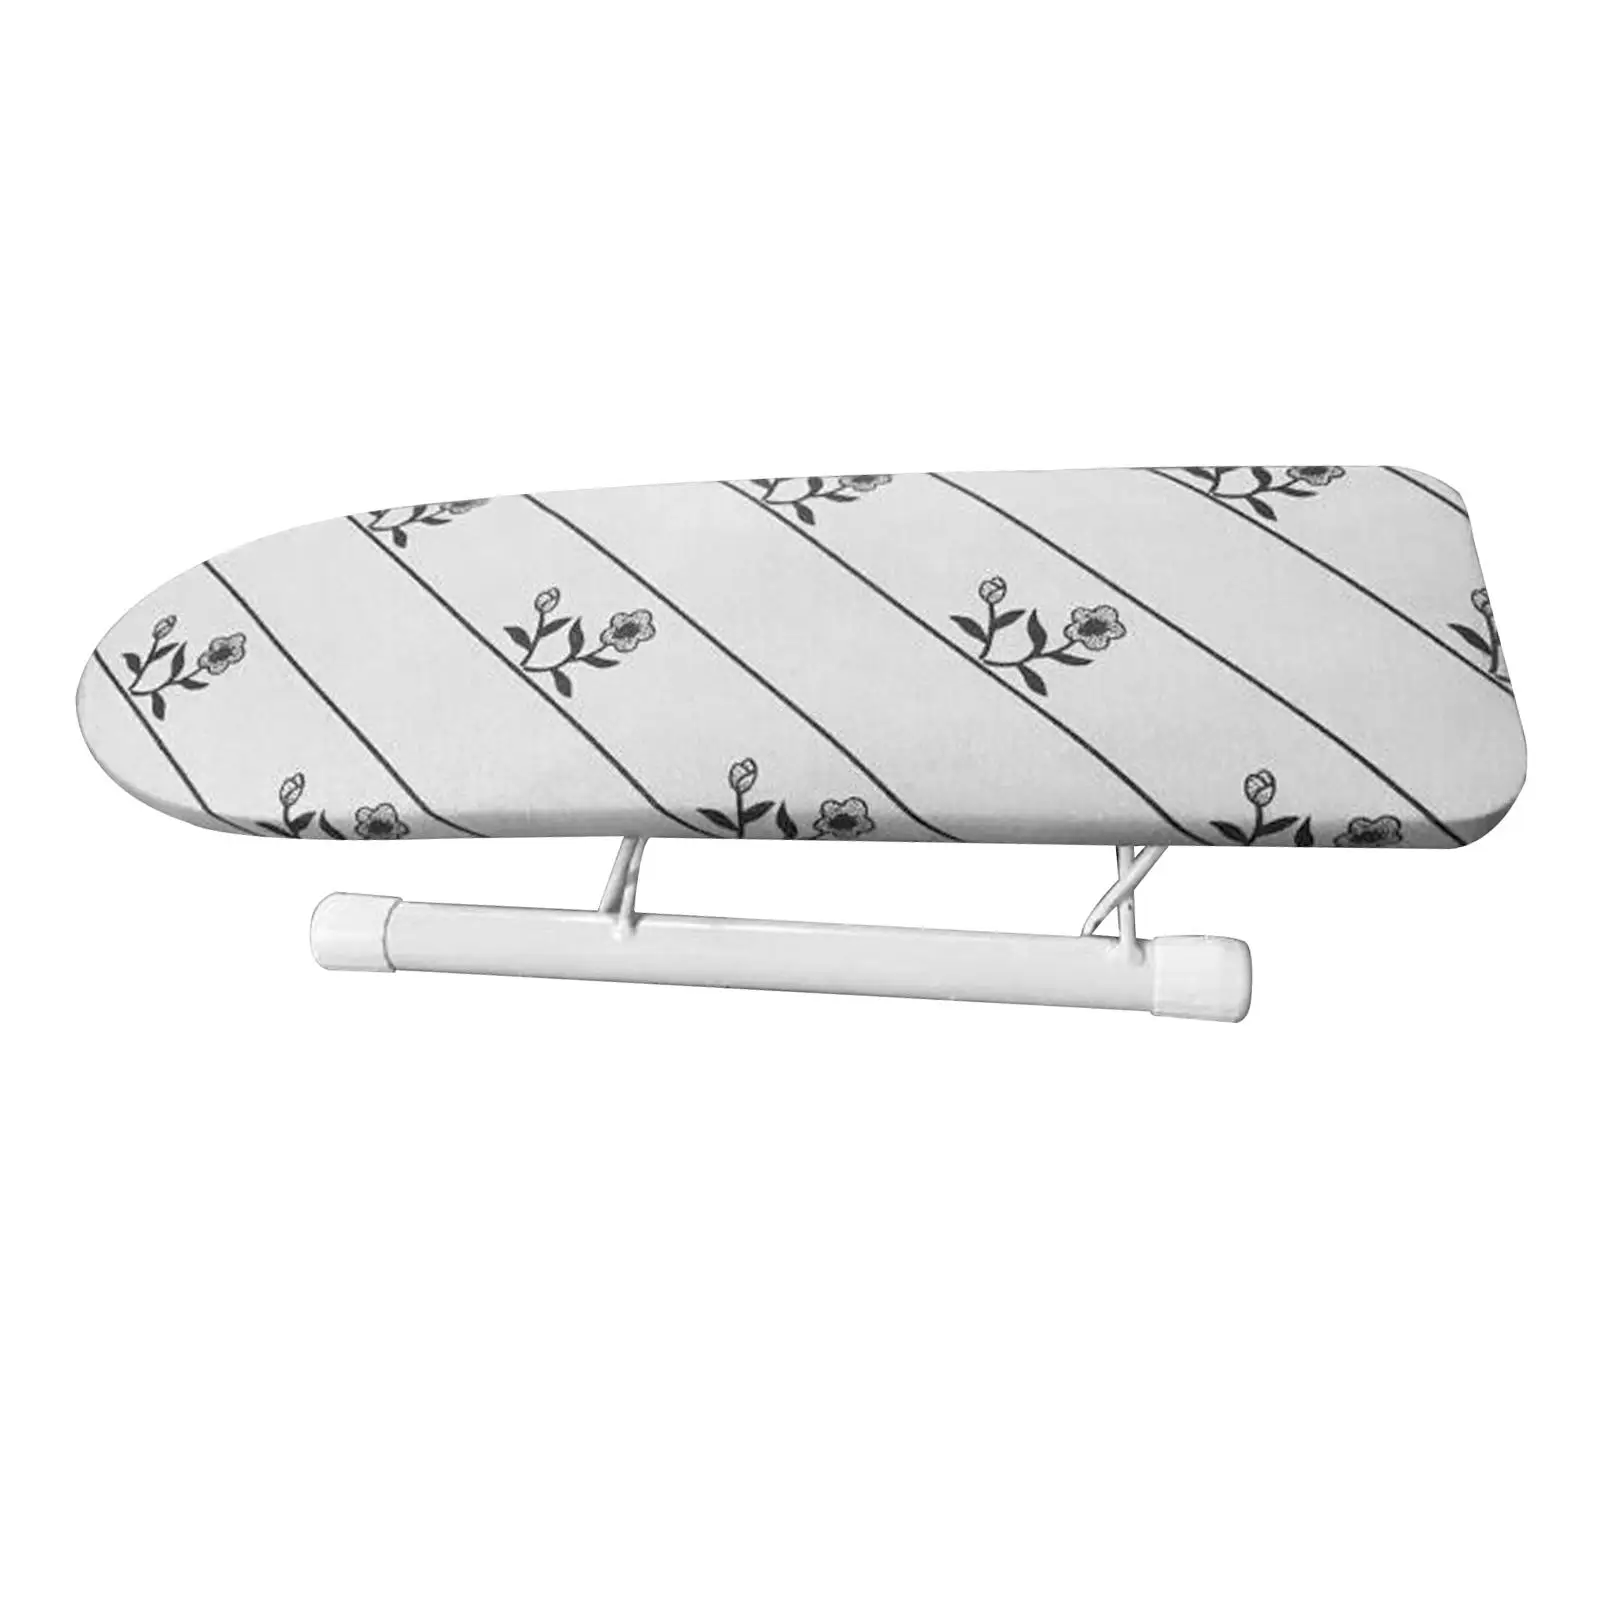 Small Ironing Board with Iron Board Cover Sleeve Rack Portable Tabletop Iron Board for Dorm Laundry Room Home Sewing Room Travel